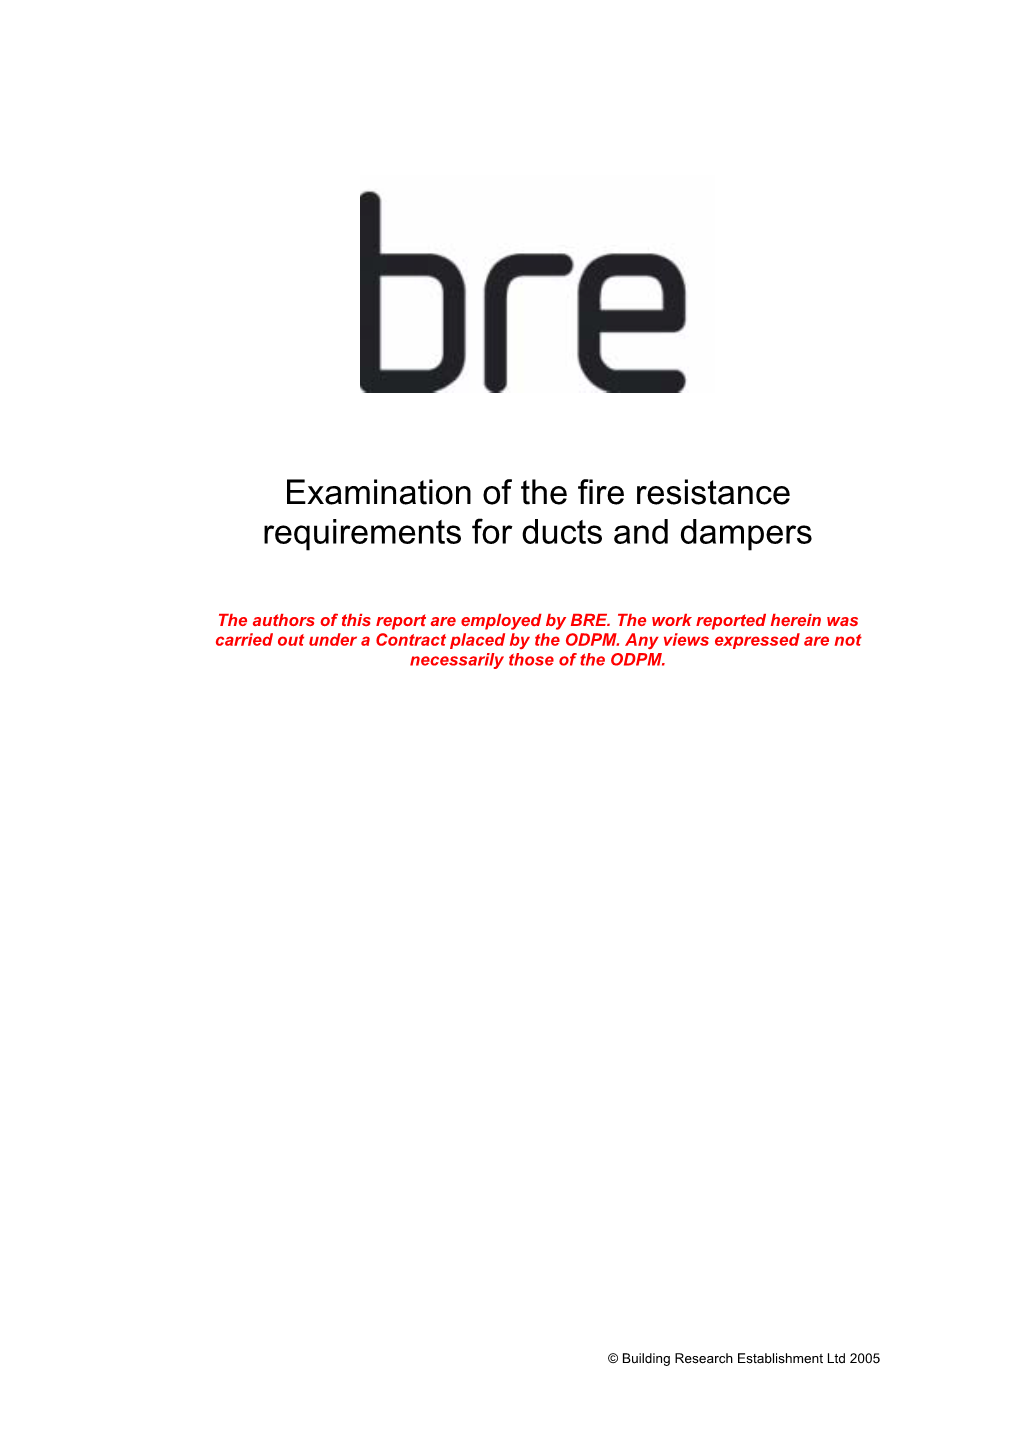 Fire Resistance Requirements for Dampers and Ducts, ODPM Contract Reference CI 71/5/6, BD 2454